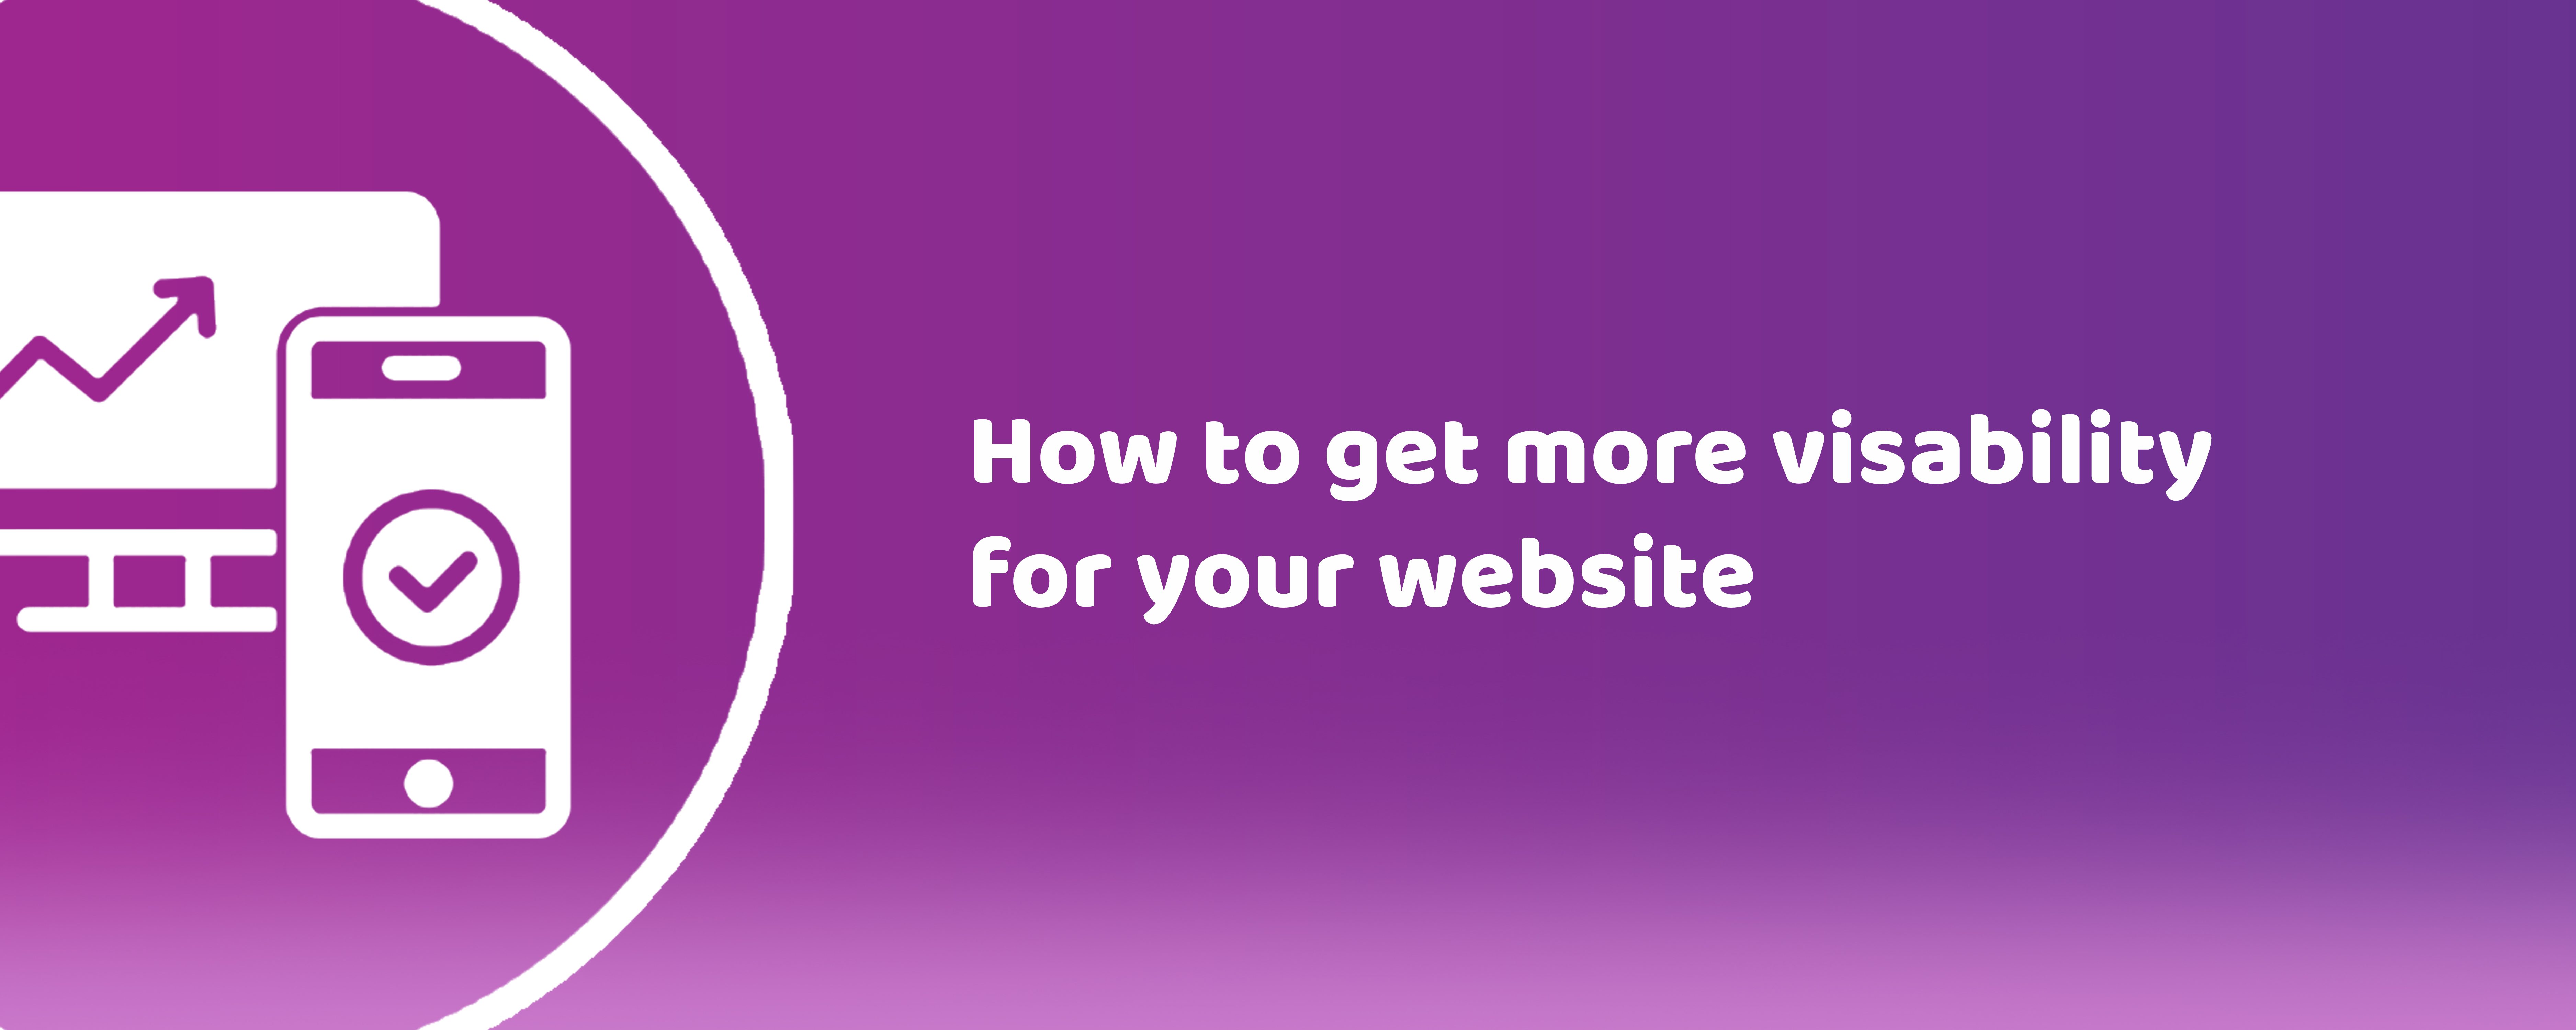 How to get more visibility for your website banner